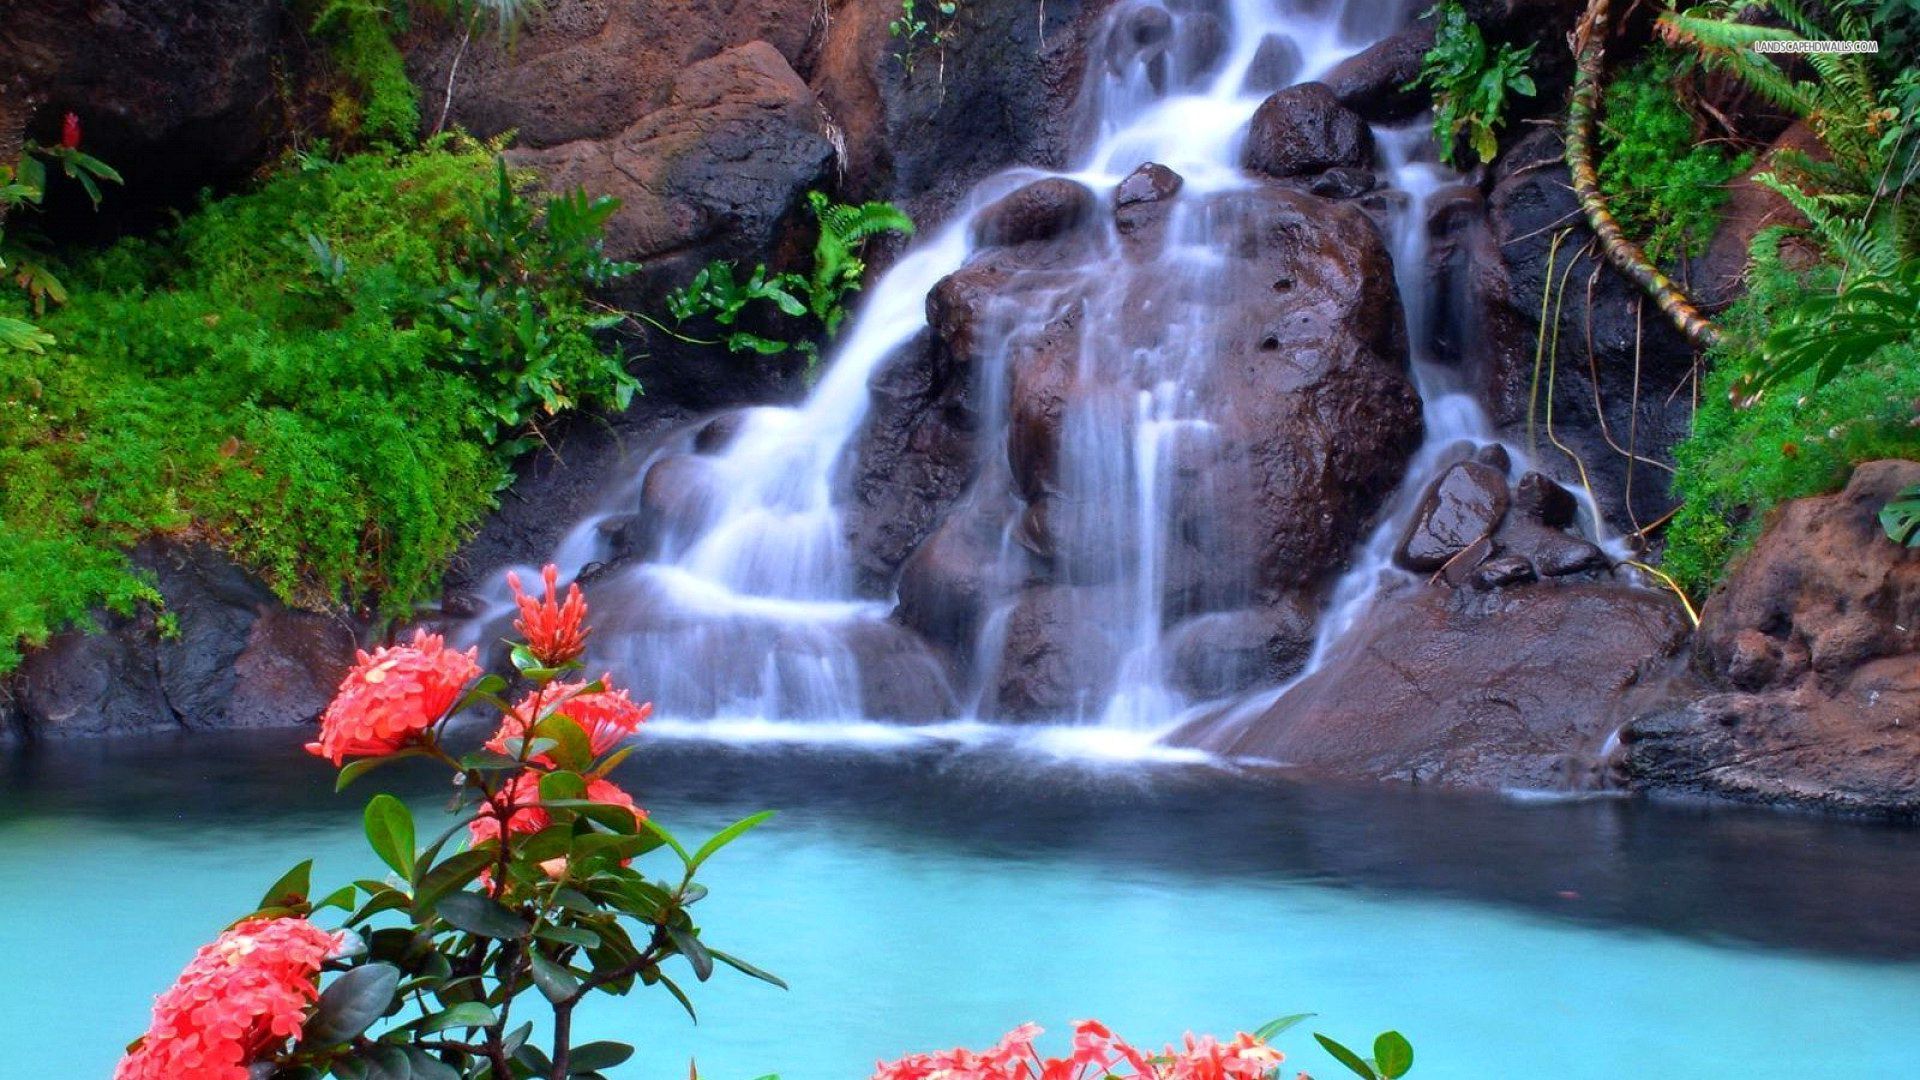 most beautiful live wallpaper,waterfall,water resources,body of water,natural landscape,nature